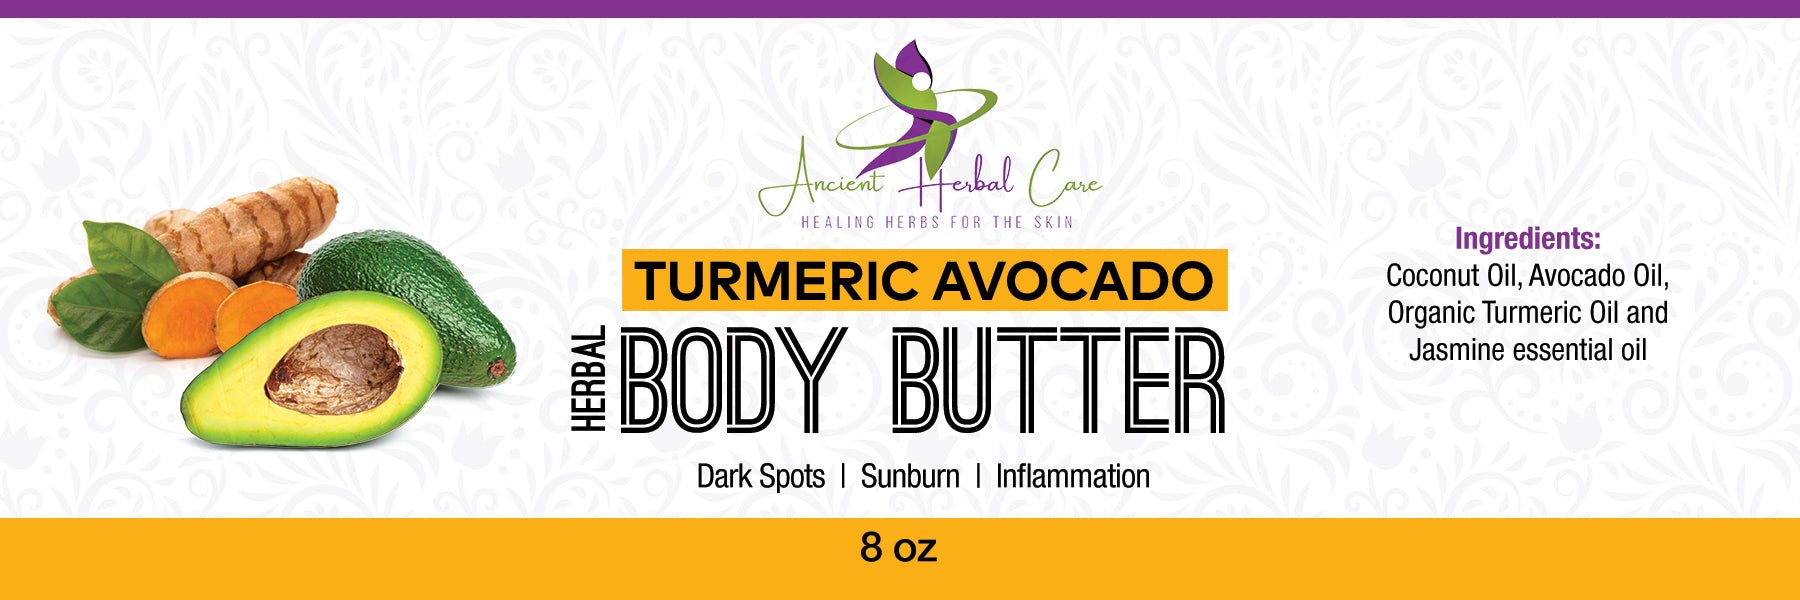 Turmeric Avocado Body Butter - Ancient Herbal Care